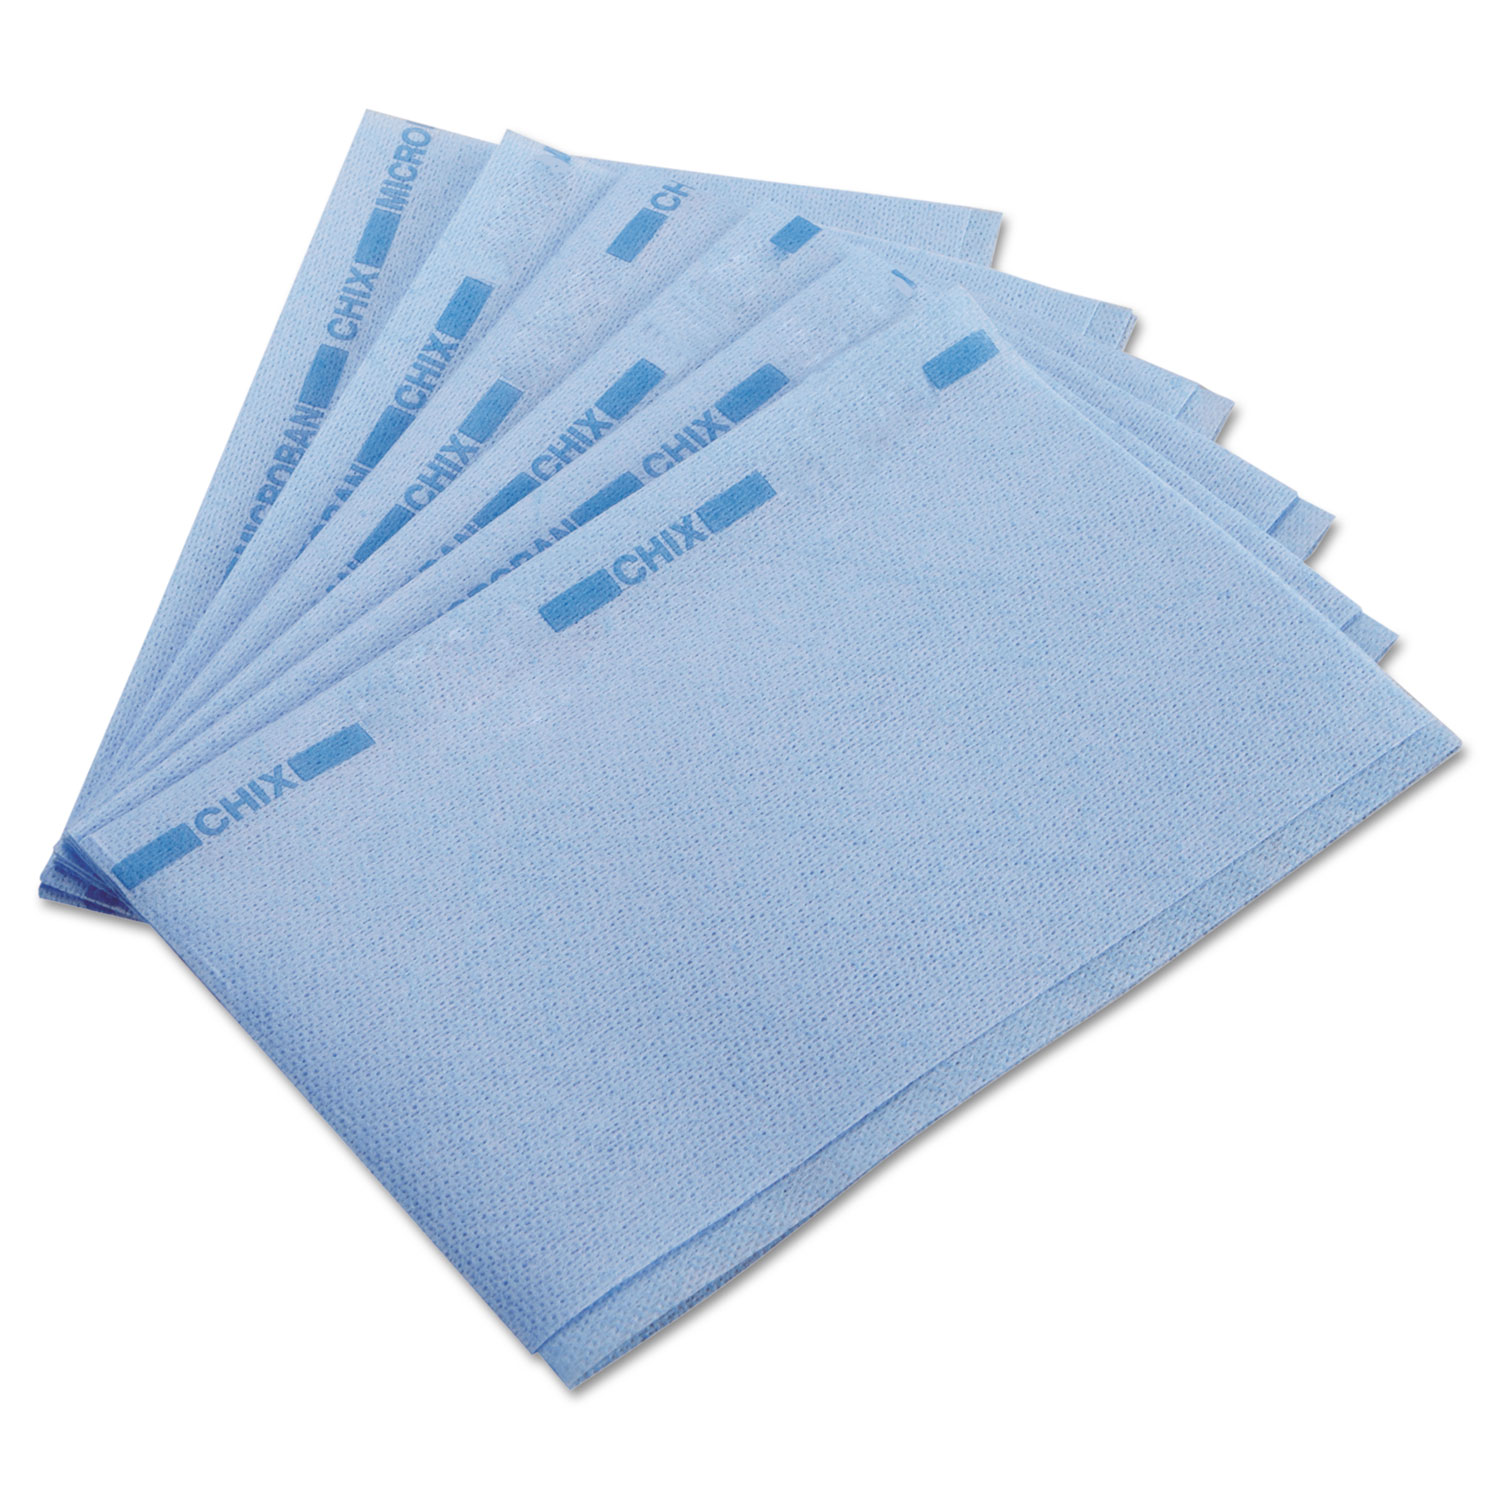 Washcloths 2- ct Packs, 12x12 in - Towel Blue Cotton Washcloths - 6 Pack